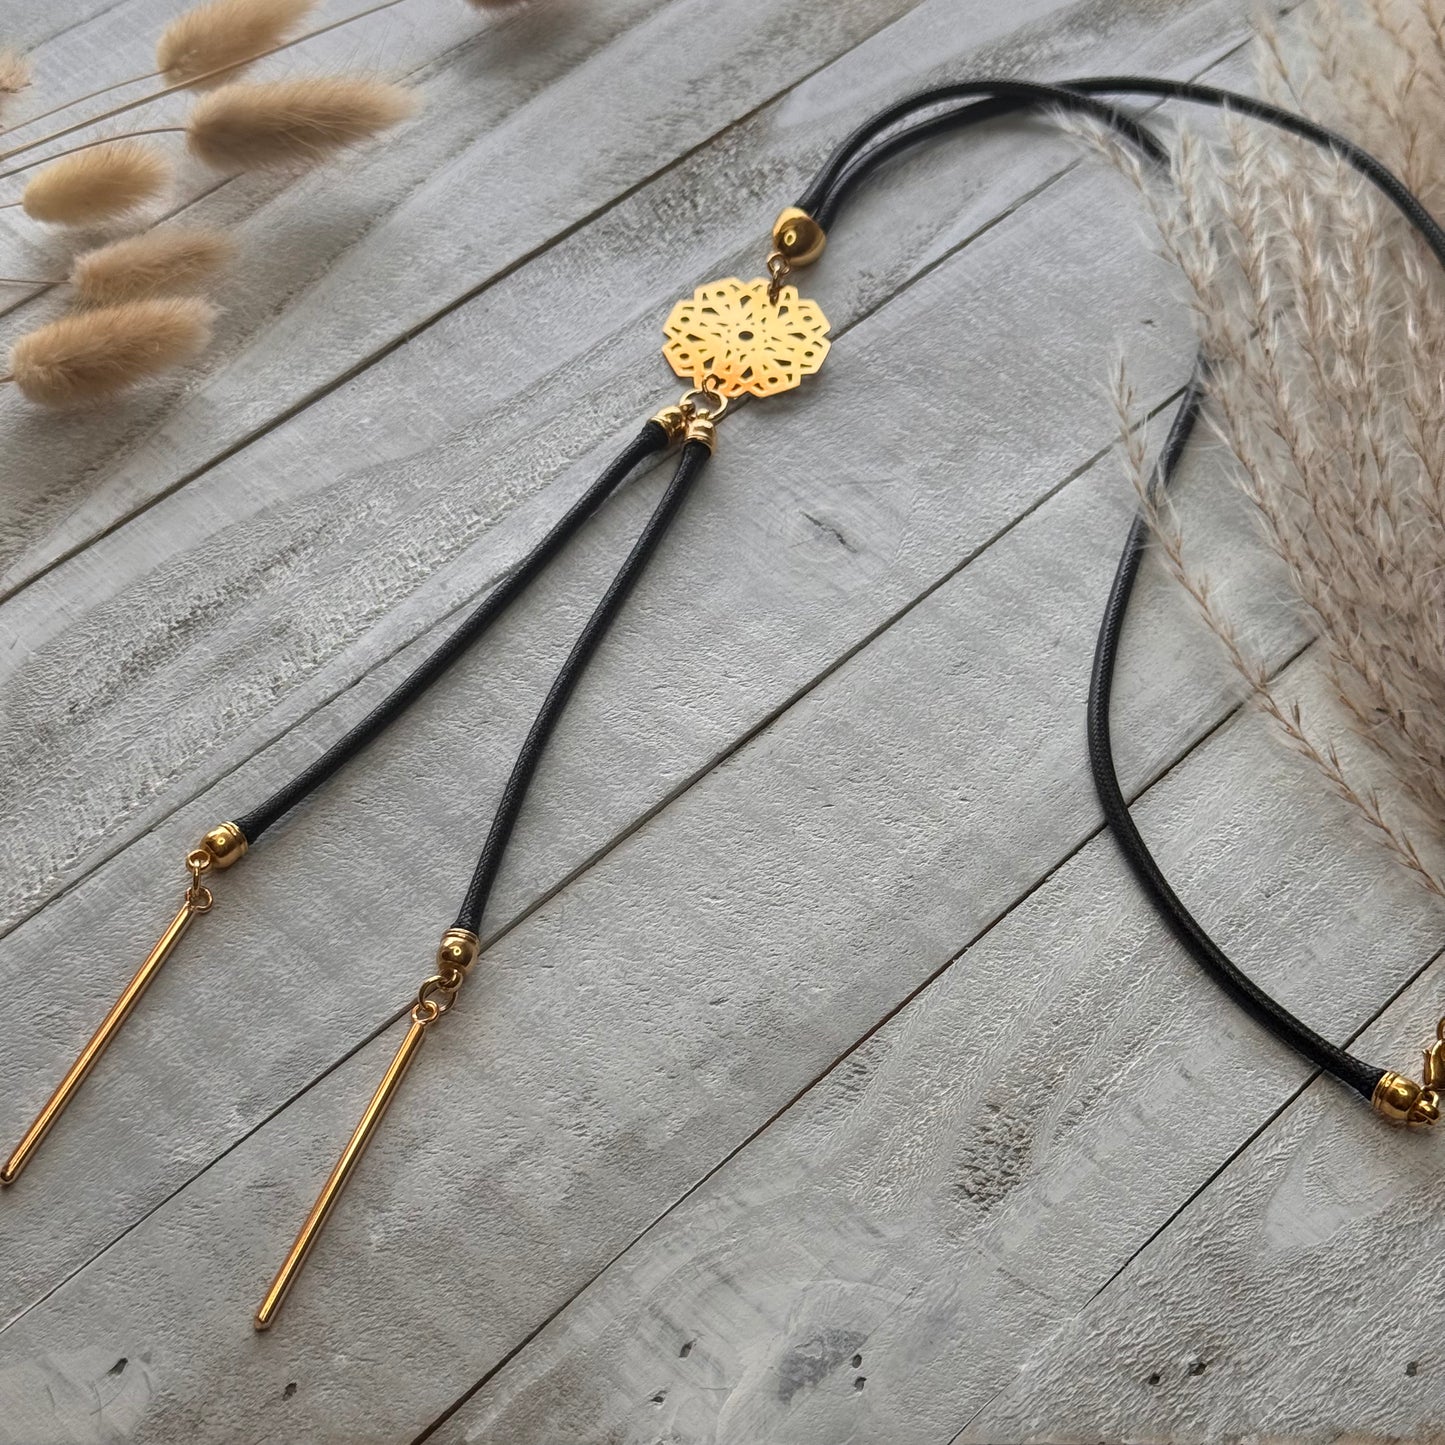 Mandala Charm Long Necklace with 18k Gold-Filled Details